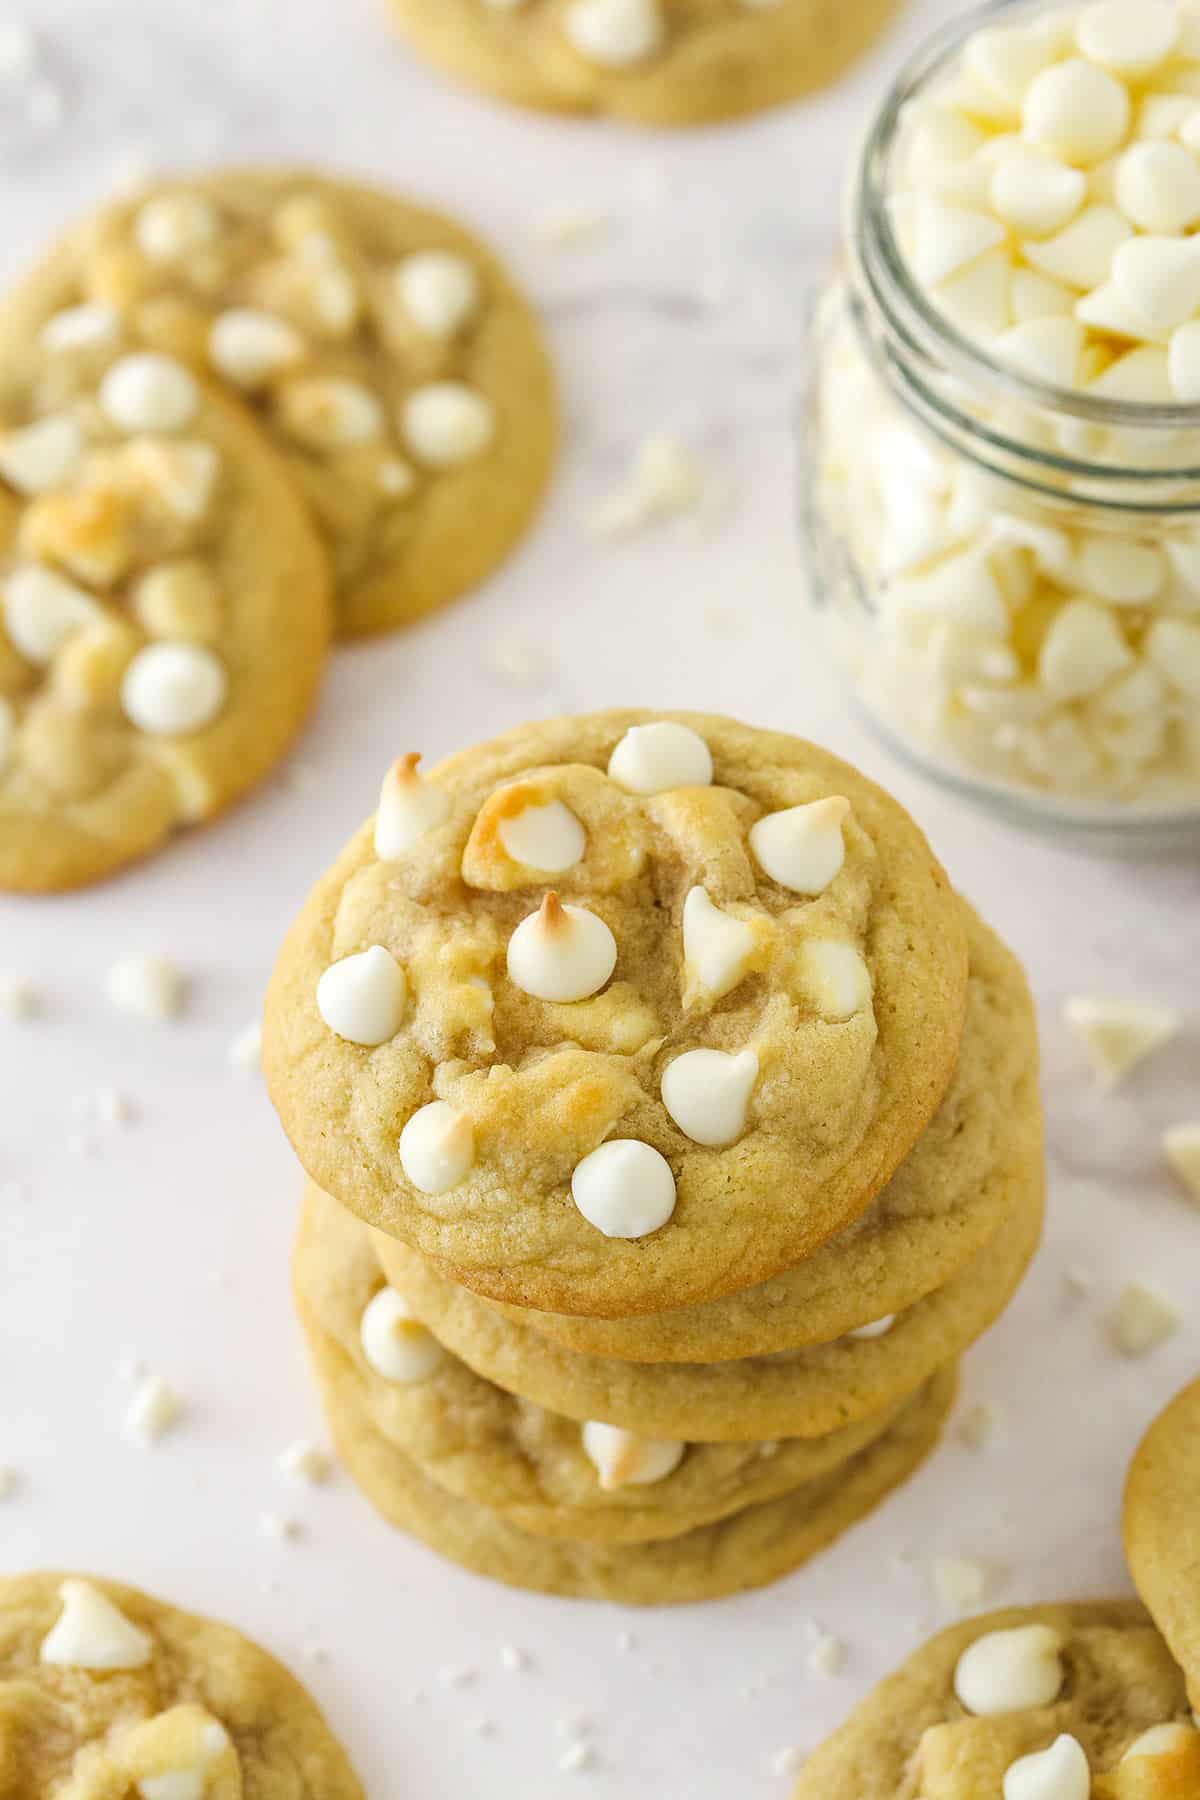 A stack of white chocolate chip cookies surrounded by other white chocolate chip cookies near a jar of white chocolate chips.